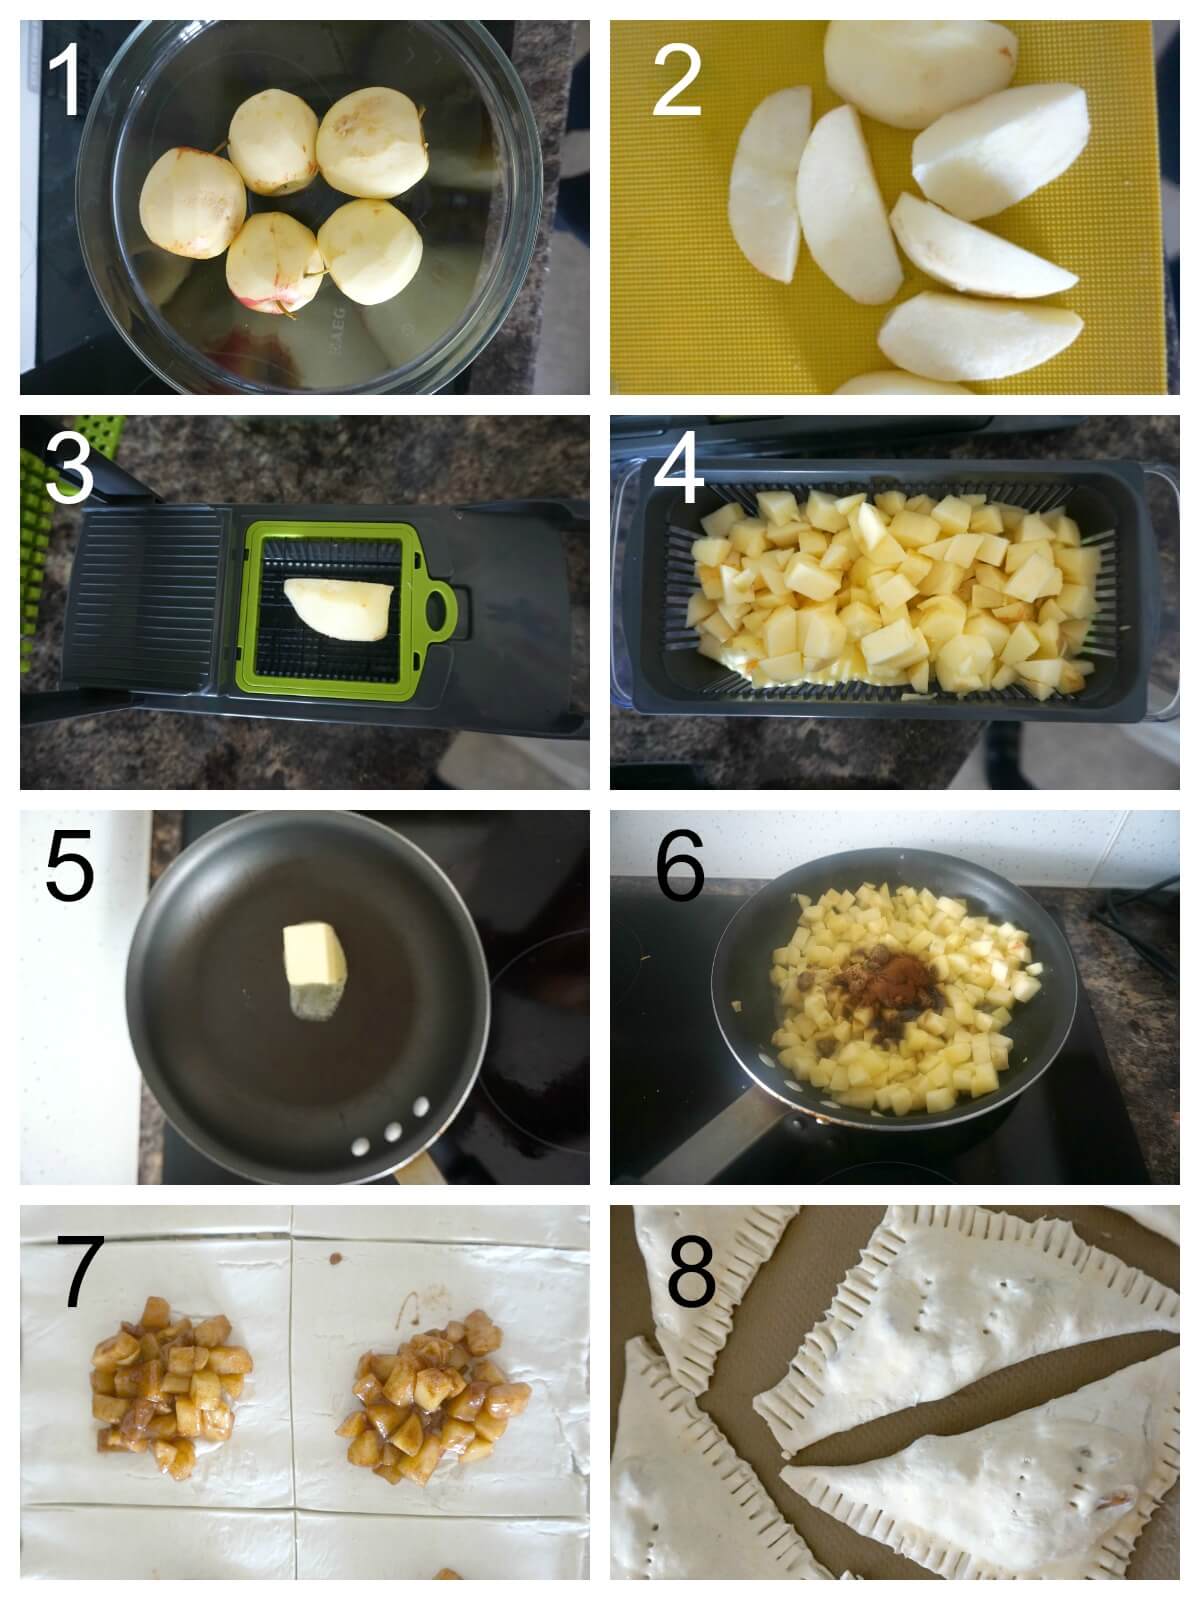 Collage of 8 photos to show how to make apple turnovers